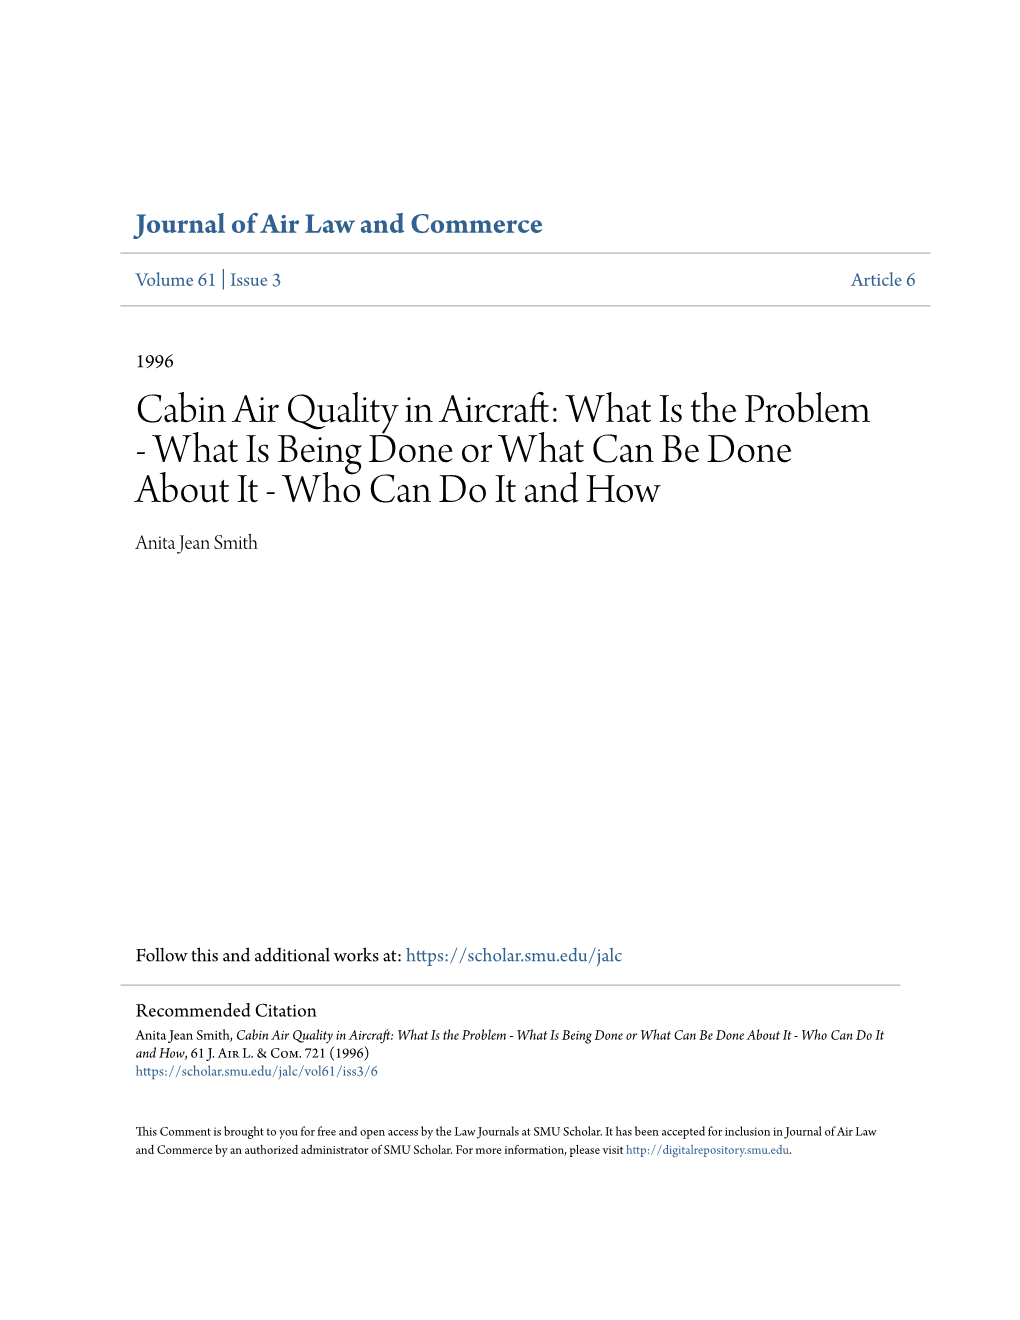 Cabin Air Quality in Aircraft: What Is the Problem - What Is Being Done Or What Can Be Done About It - Who Can Do It and How Anita Jean Smith